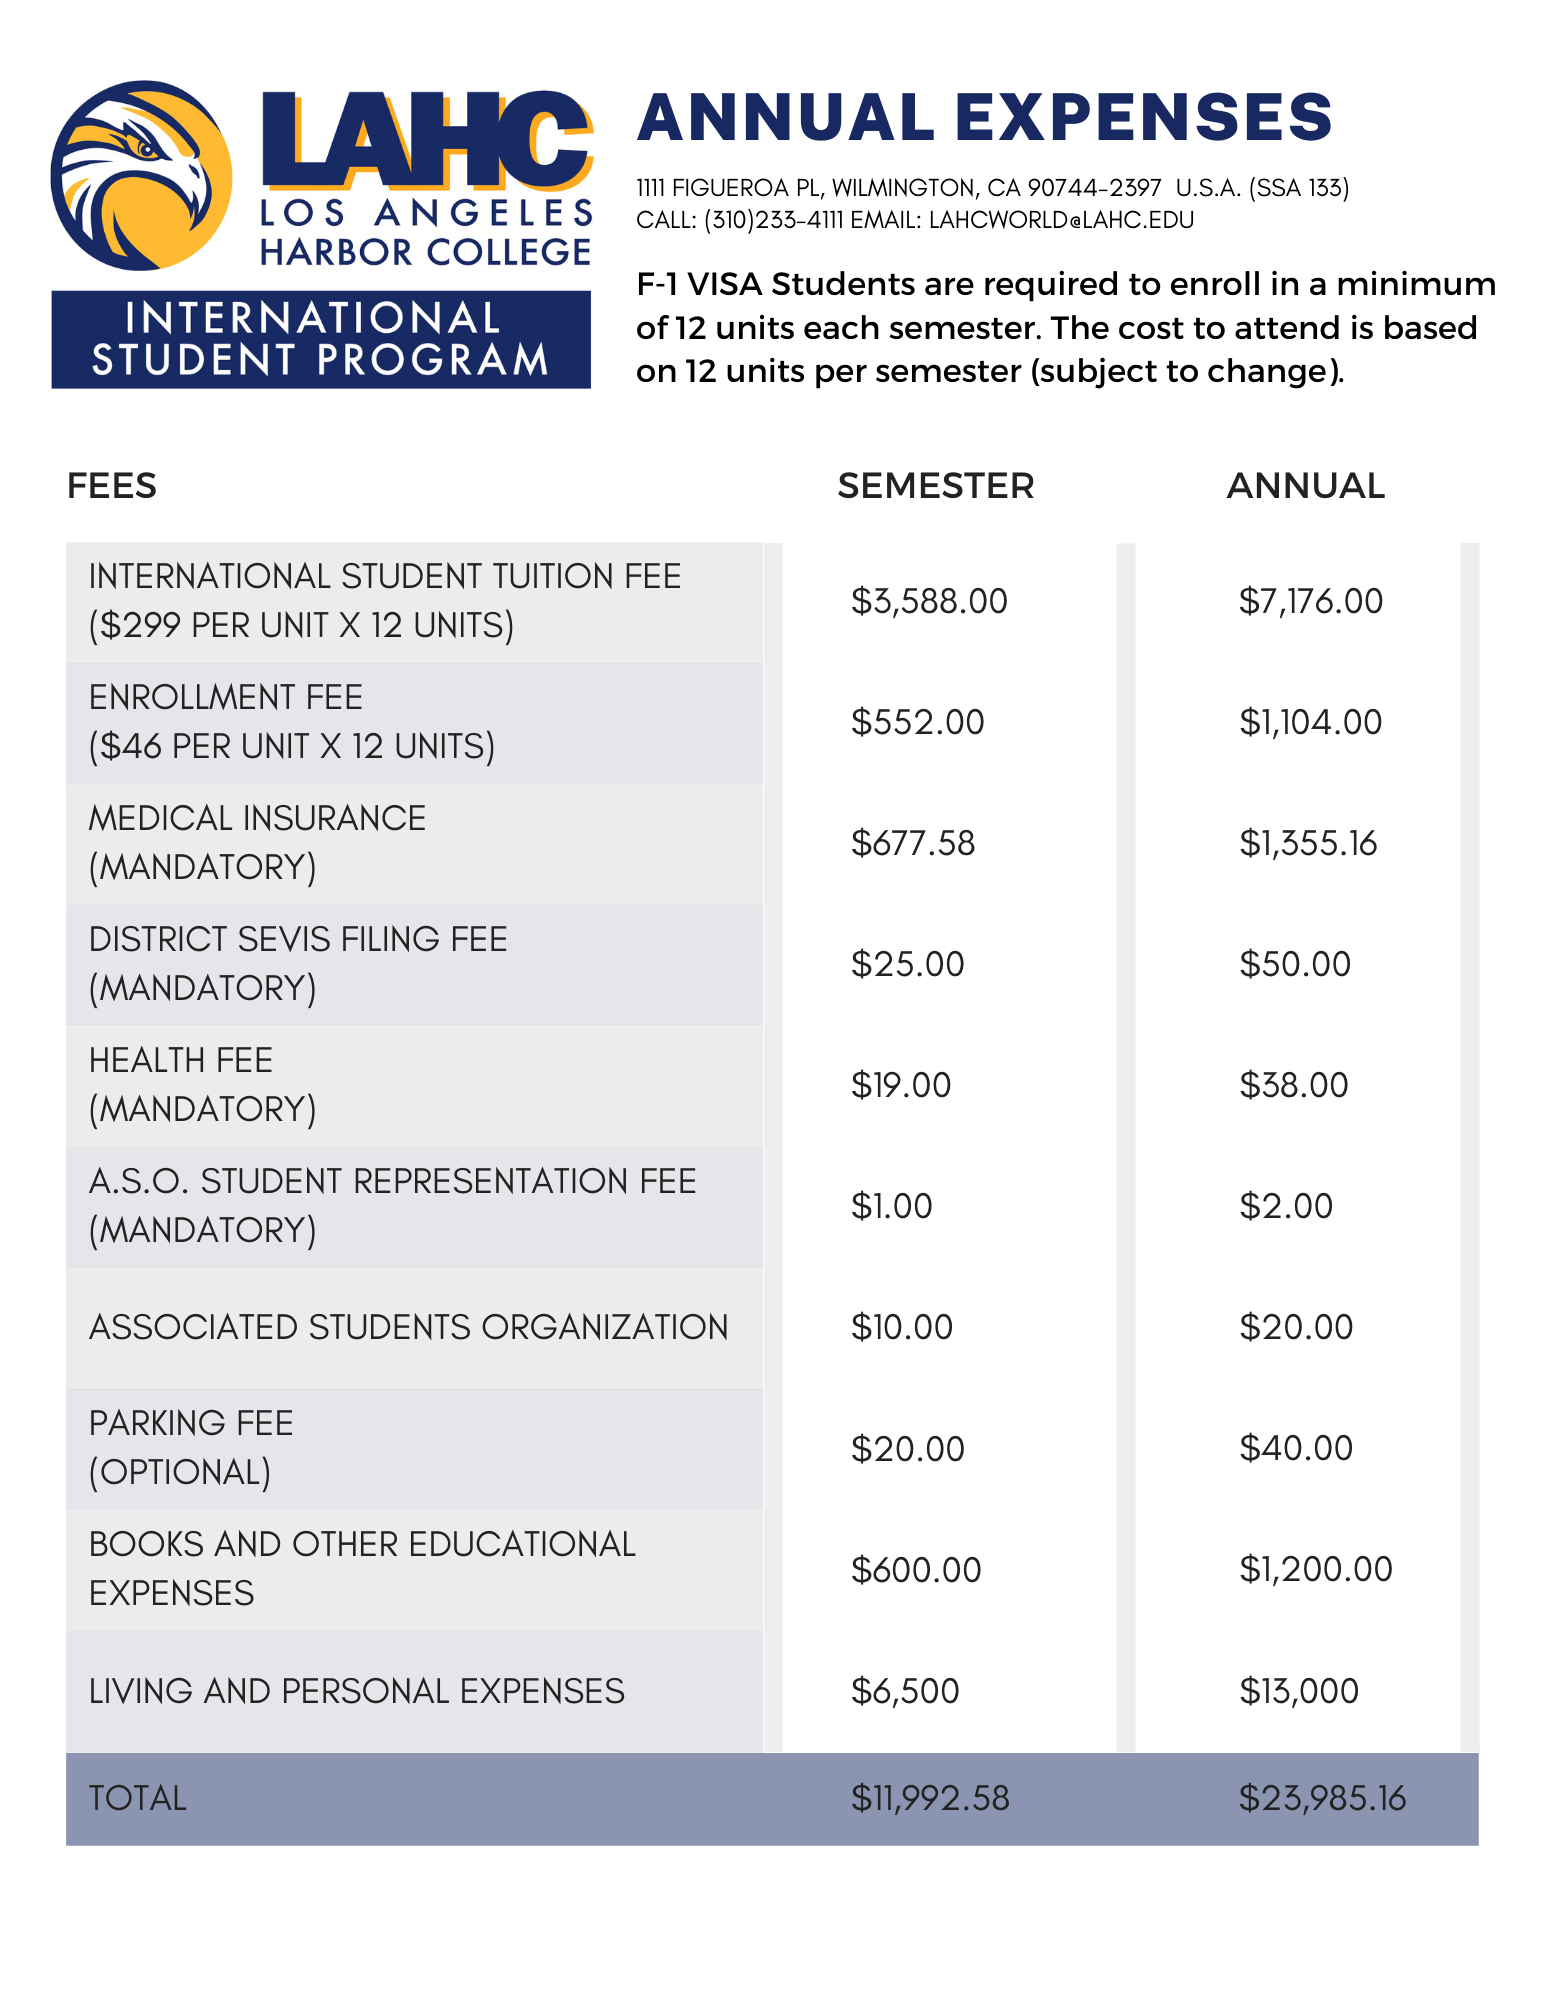 LAHC Annual Expenses Table